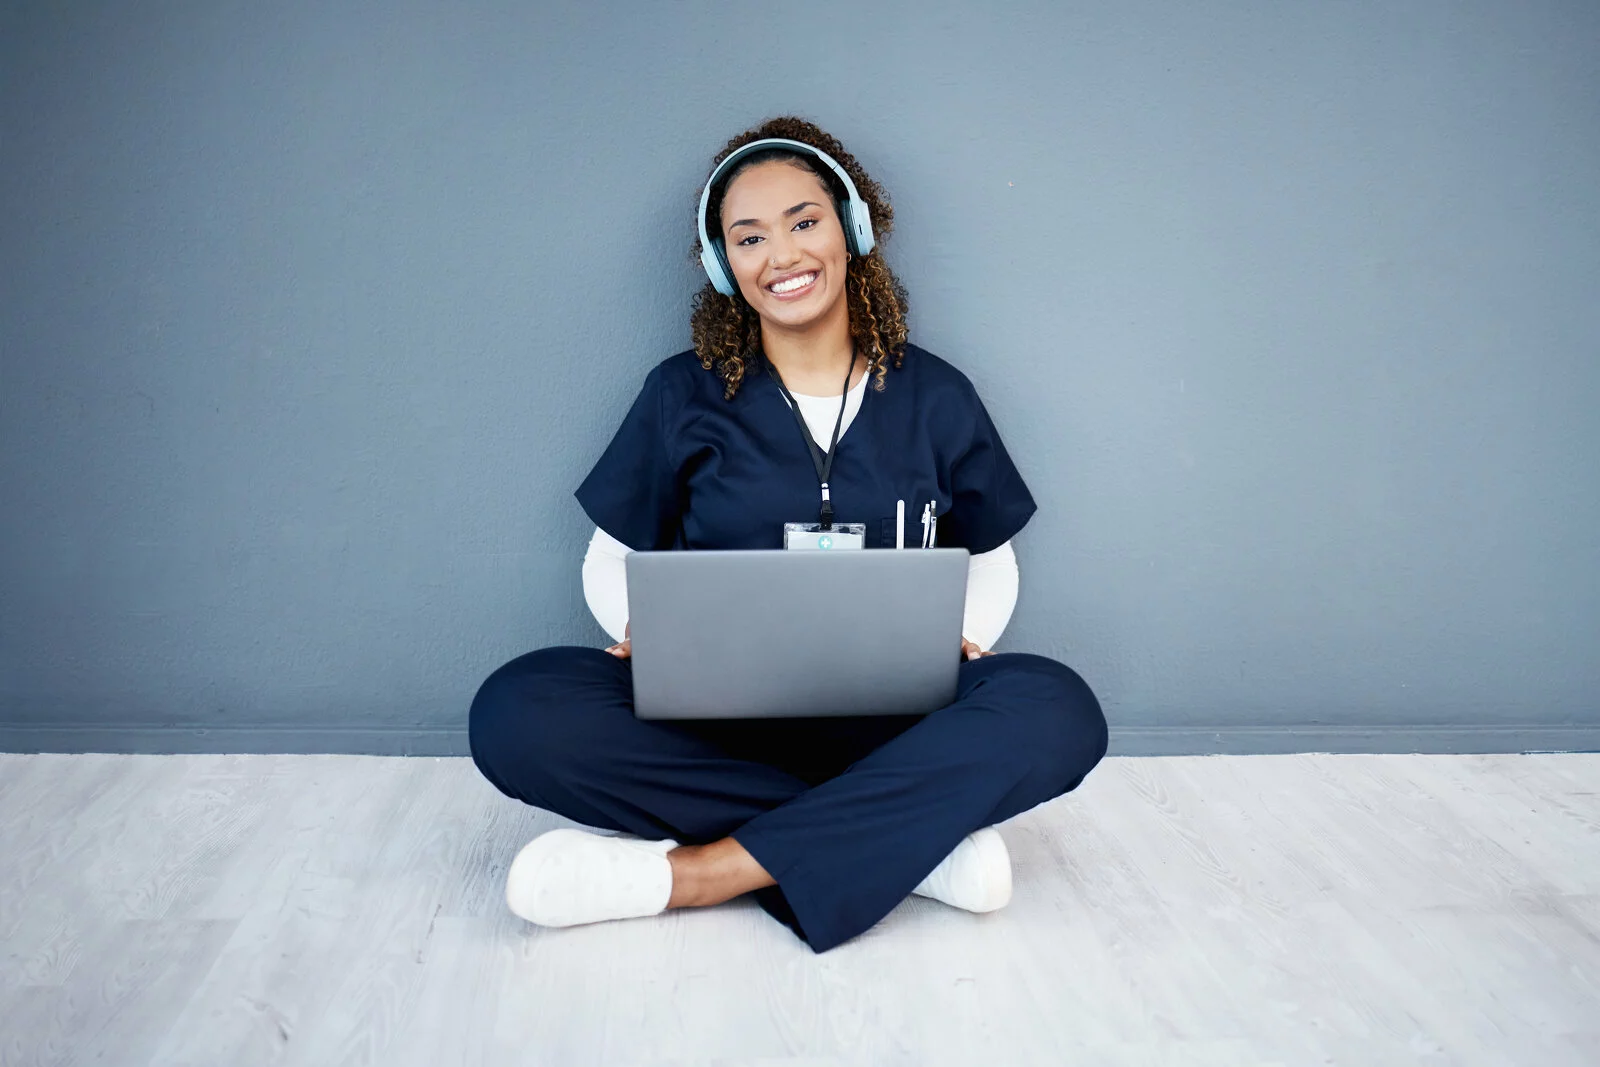 Portrait, laptop or headphones of hospital music, podcast or radio in woman study research or mock up nurse learning. Smile, happy or medical student on technology and listening to healthcare audio 2023/12/iStock-1482827000-1.jpg 